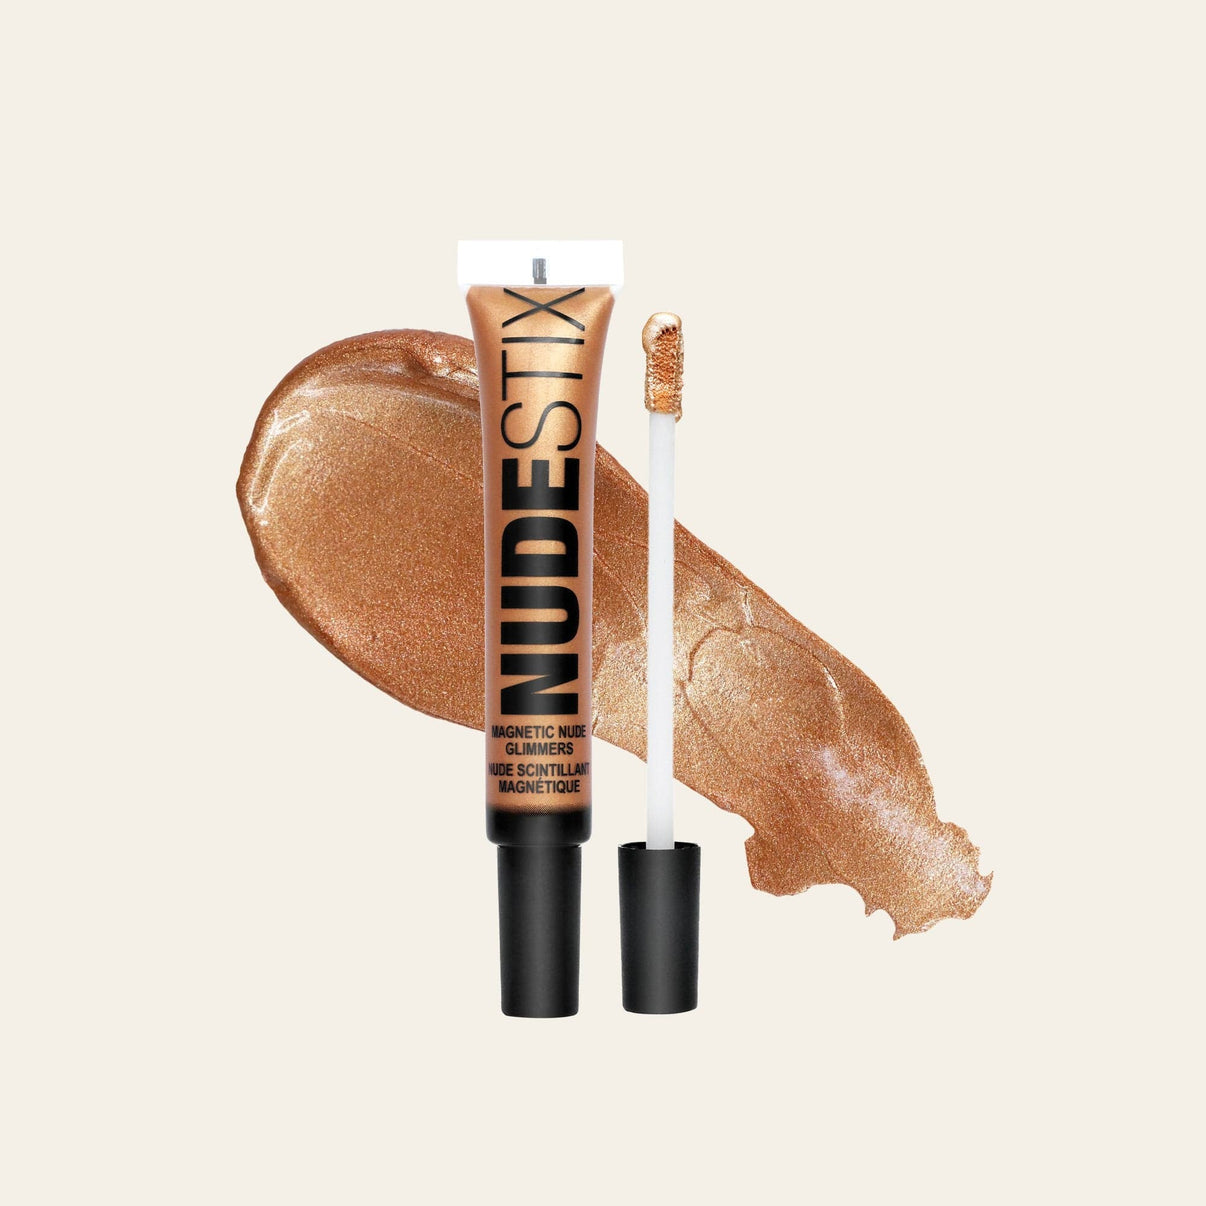 Magnetic Nude Glimmers Liquid Highlighter in shade bronzi babe with texture swatch